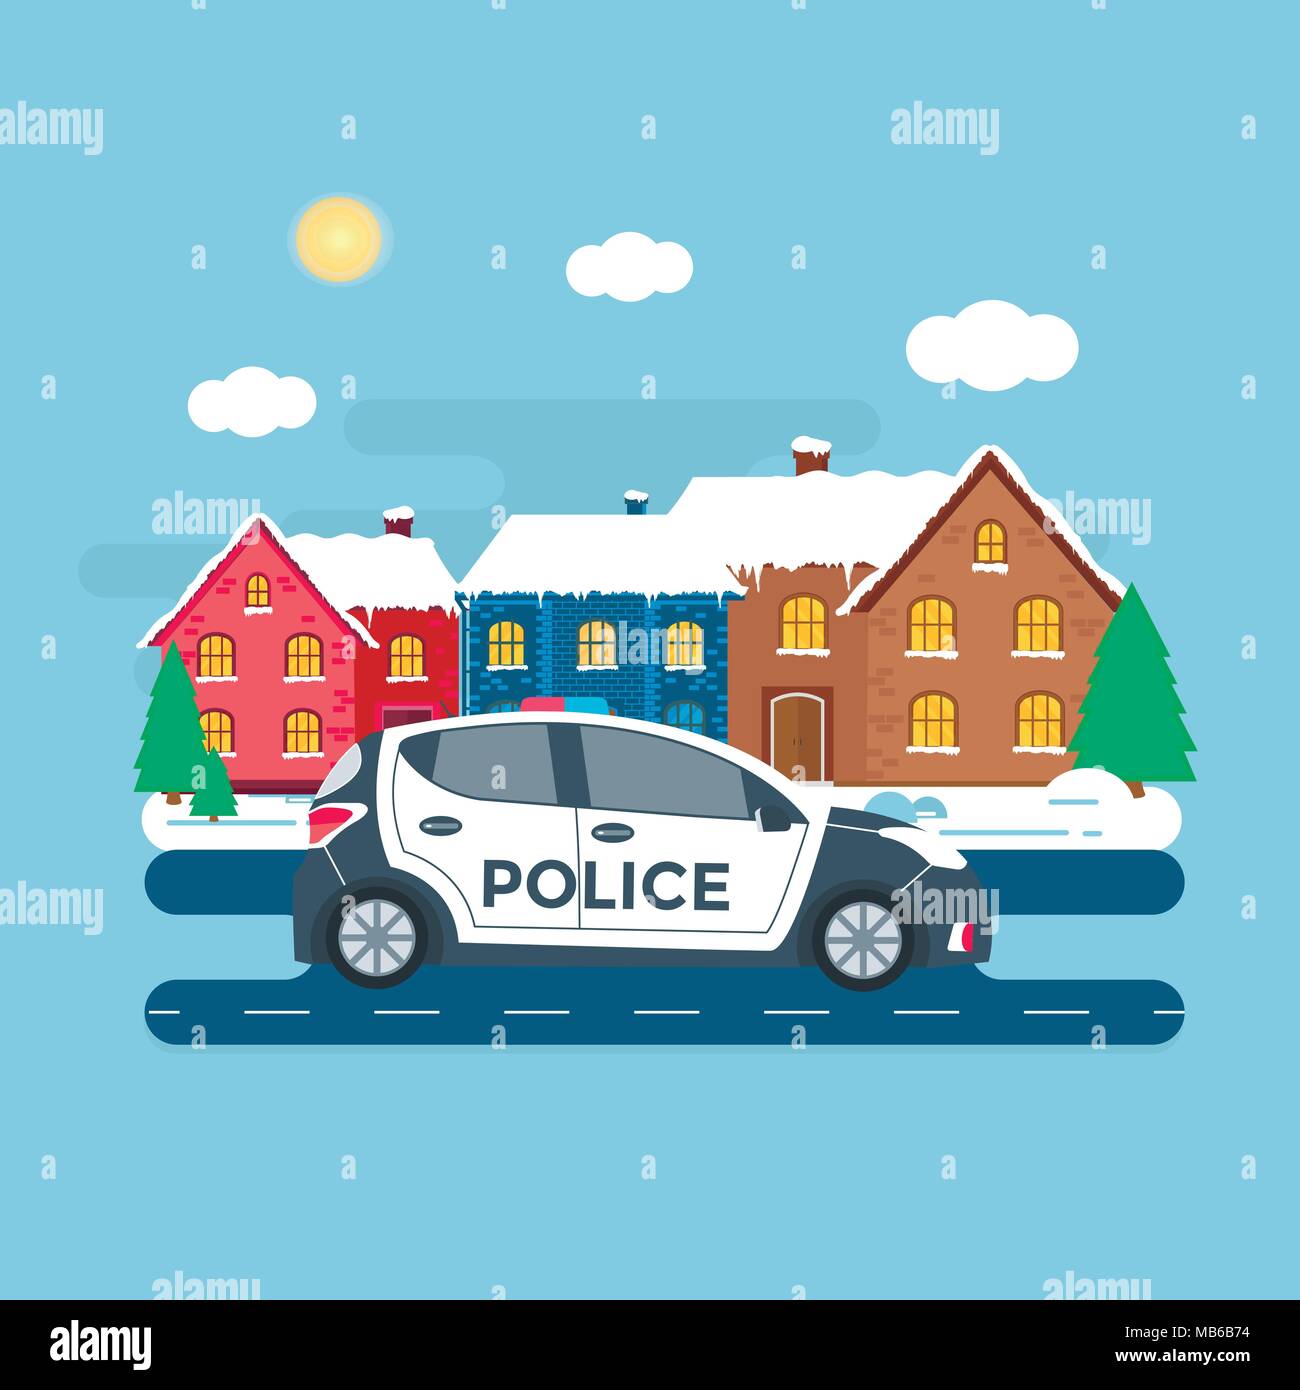 Police patrol on a road with police car, officer, house, nature landscape. Policeman in uniform, vehicle with rooftop flashing lights. Flat vector ill Stock Vector